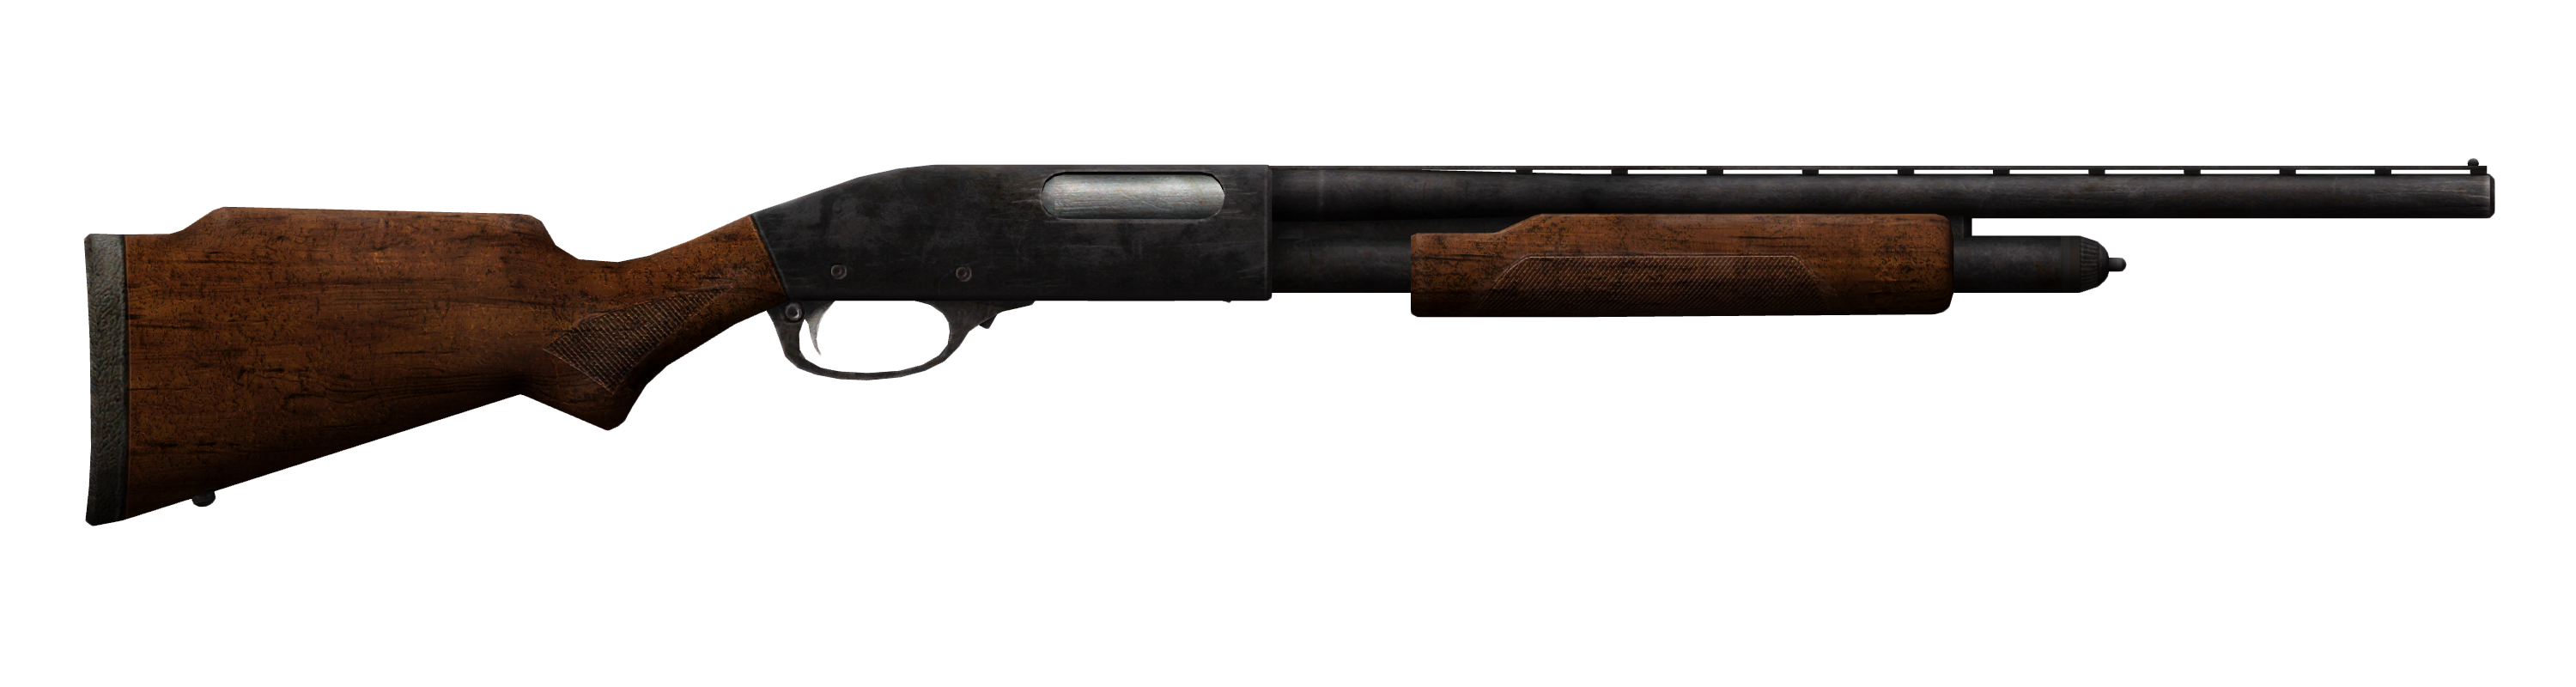 Hunting shotgun - The Fallout wiki - Fallout: New Vegas and more